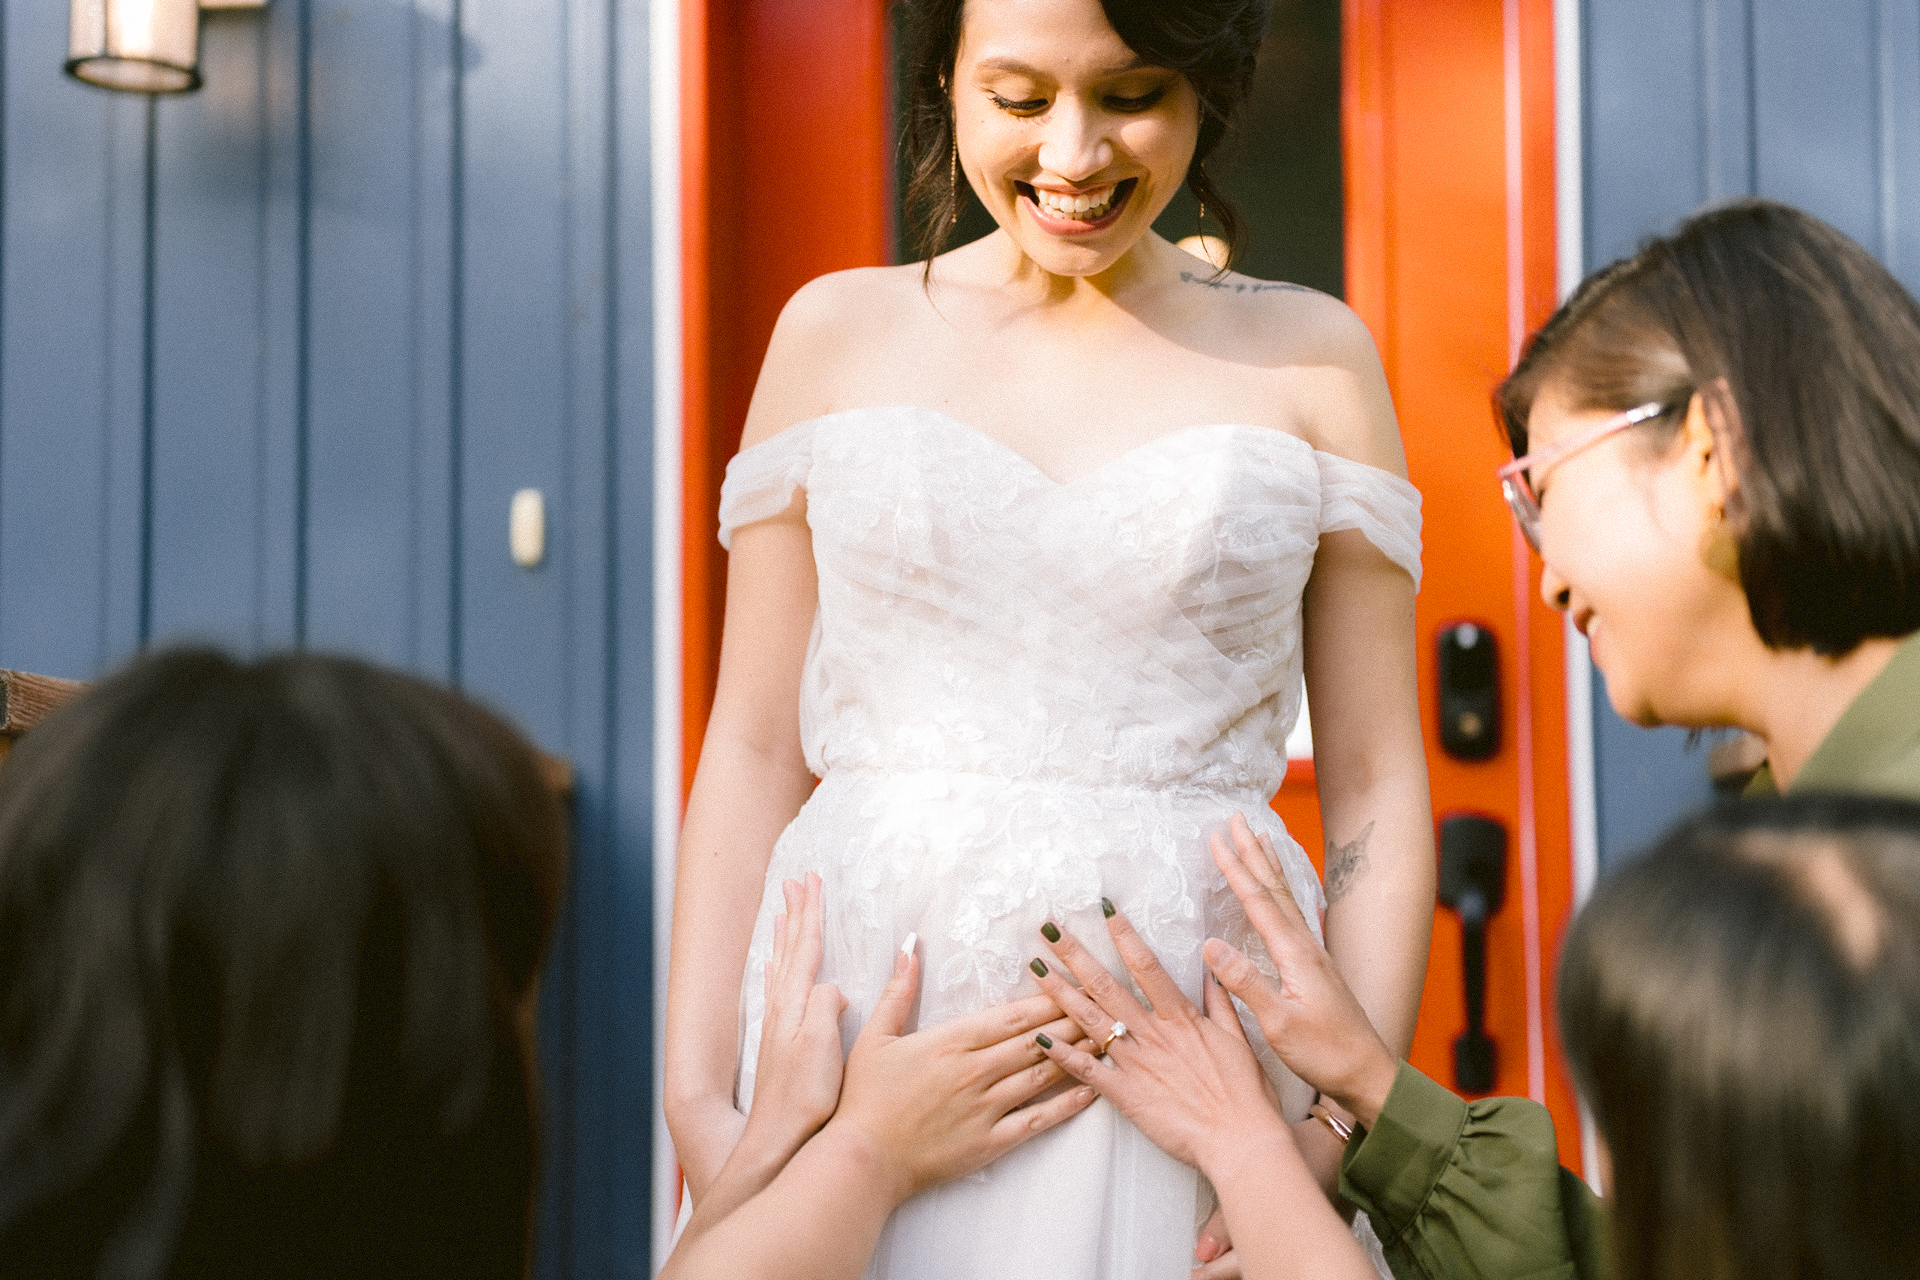 A smiling bride in a white dress is being greeted by guests touching her pregnant belly